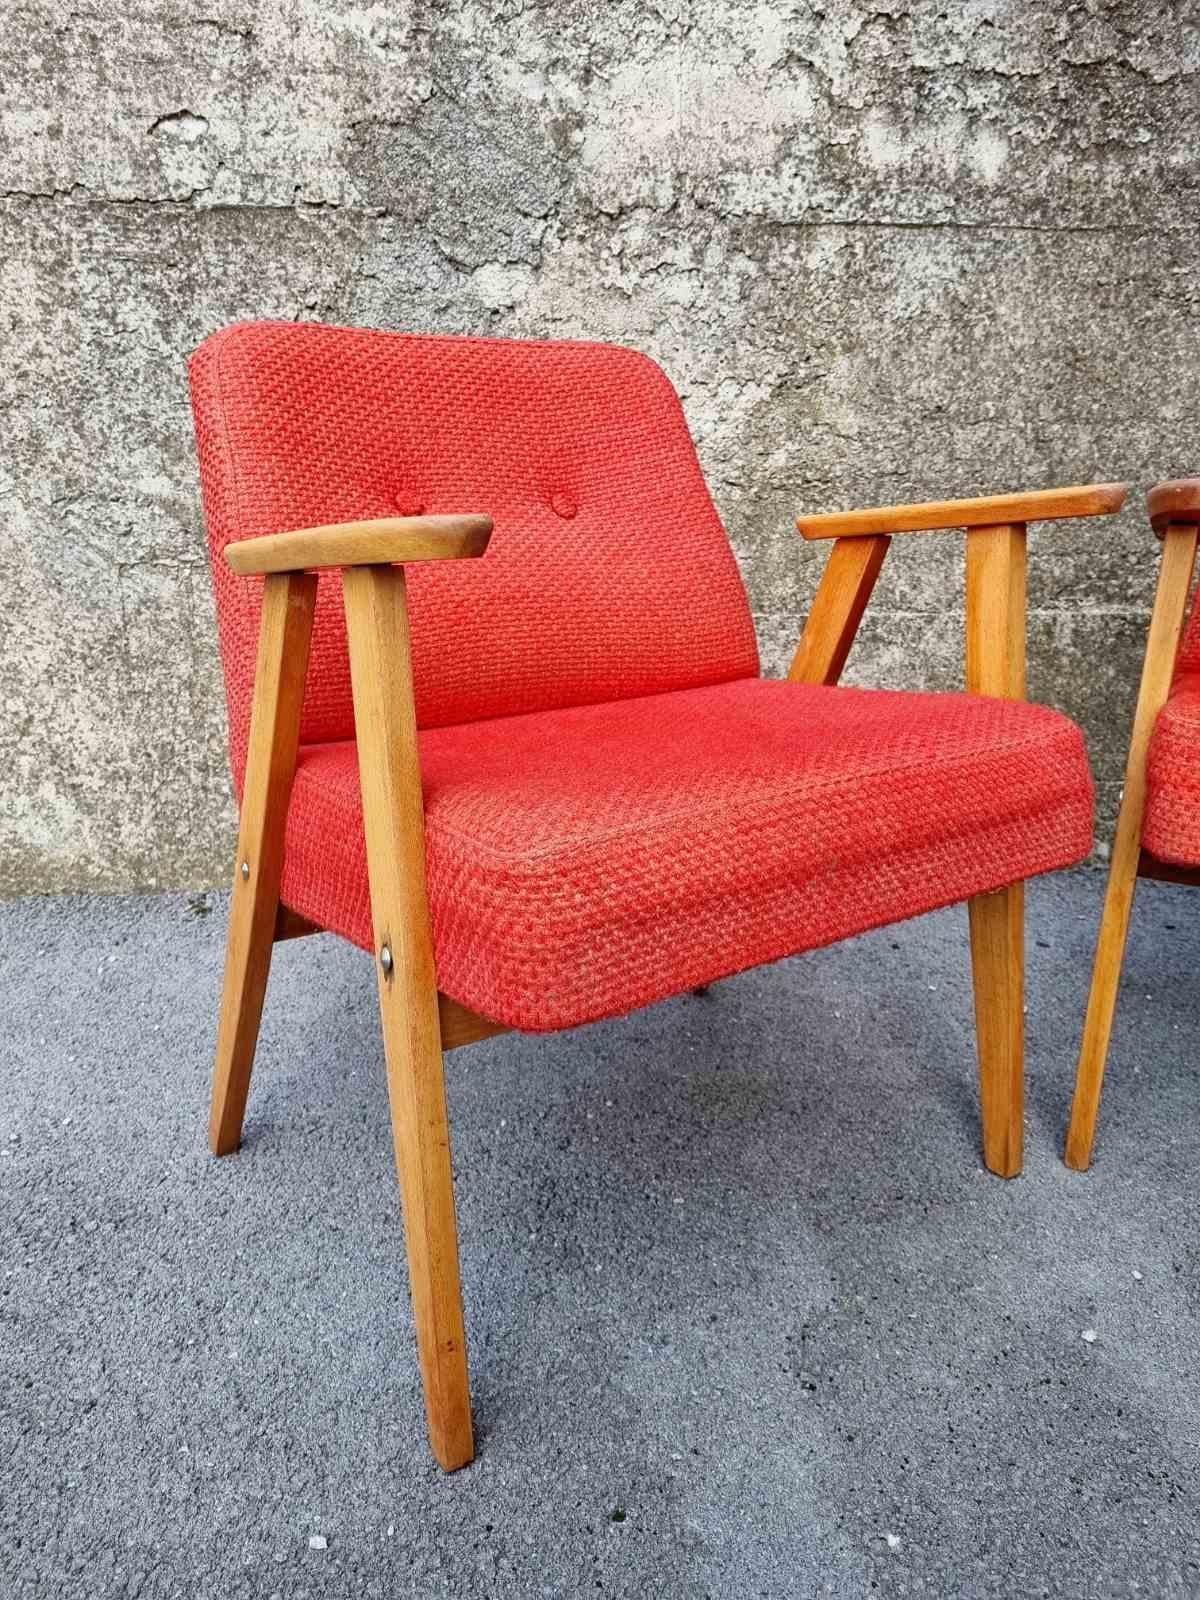 Gorgeous pair of orange Armchairs, model 366, were made in '60s in Poland. They were designed by Jozef Chierowski.

*Price is for pair.

The Chairs are in very good vintage condition. They have original orange-red fabric. They are functional and